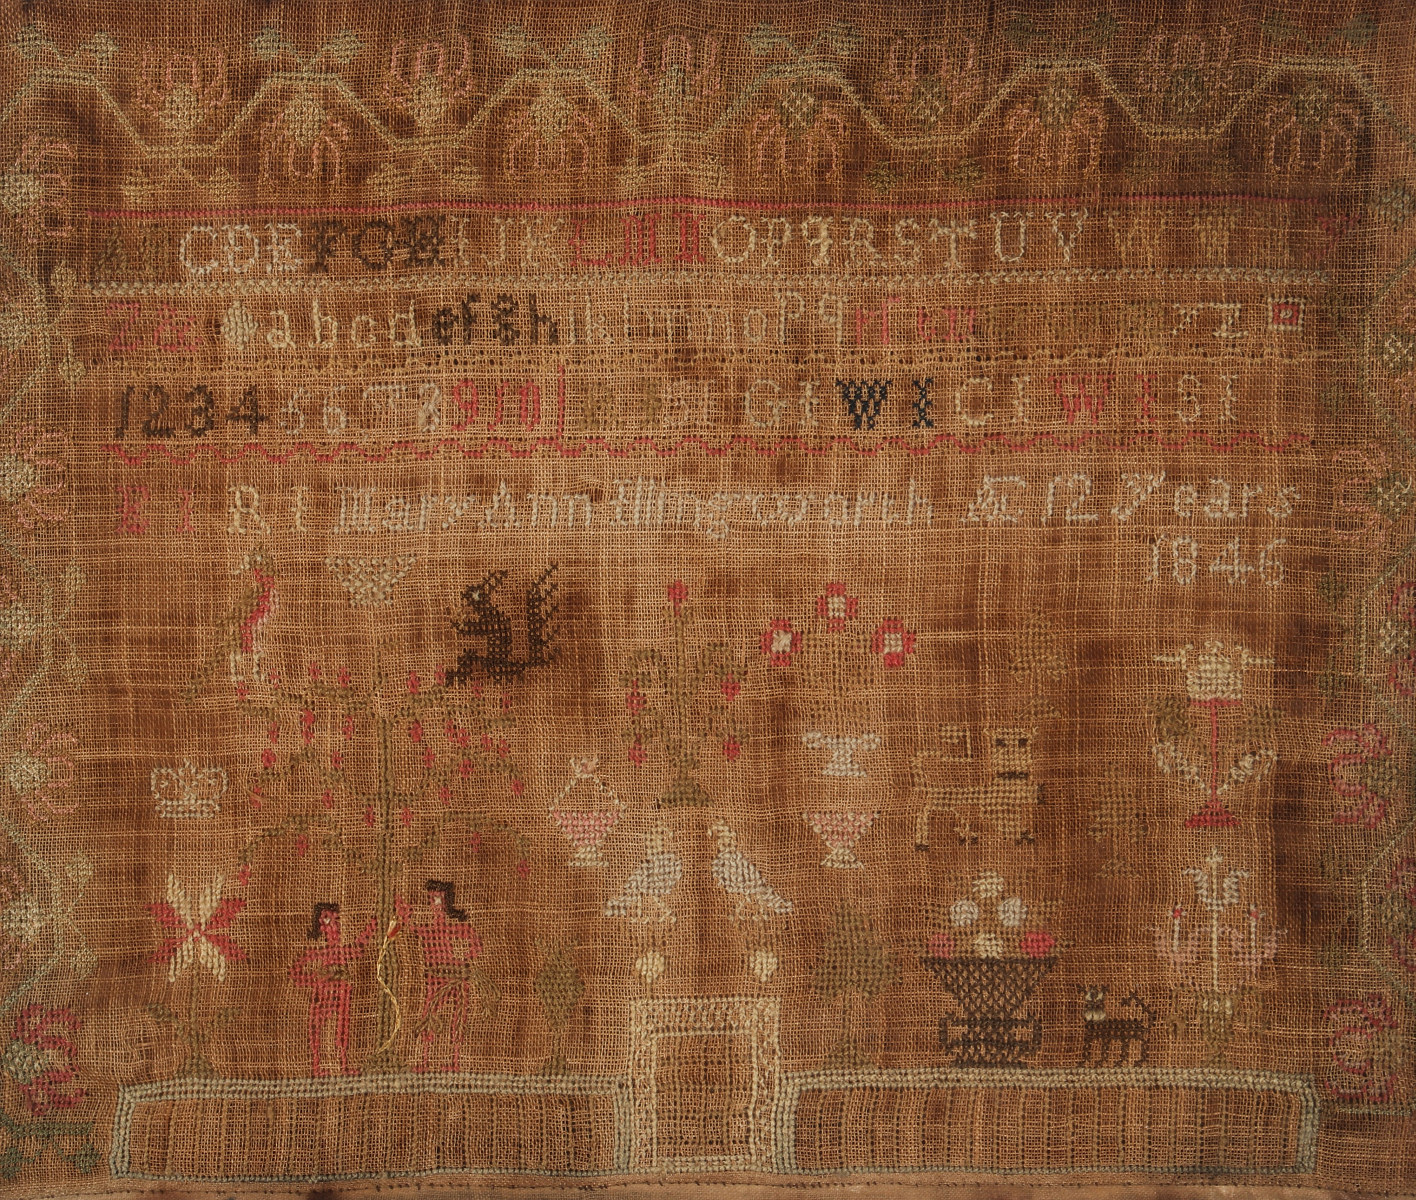 A 19TH CENT BRITISH SAMPLER WITH ADAM AND EVE